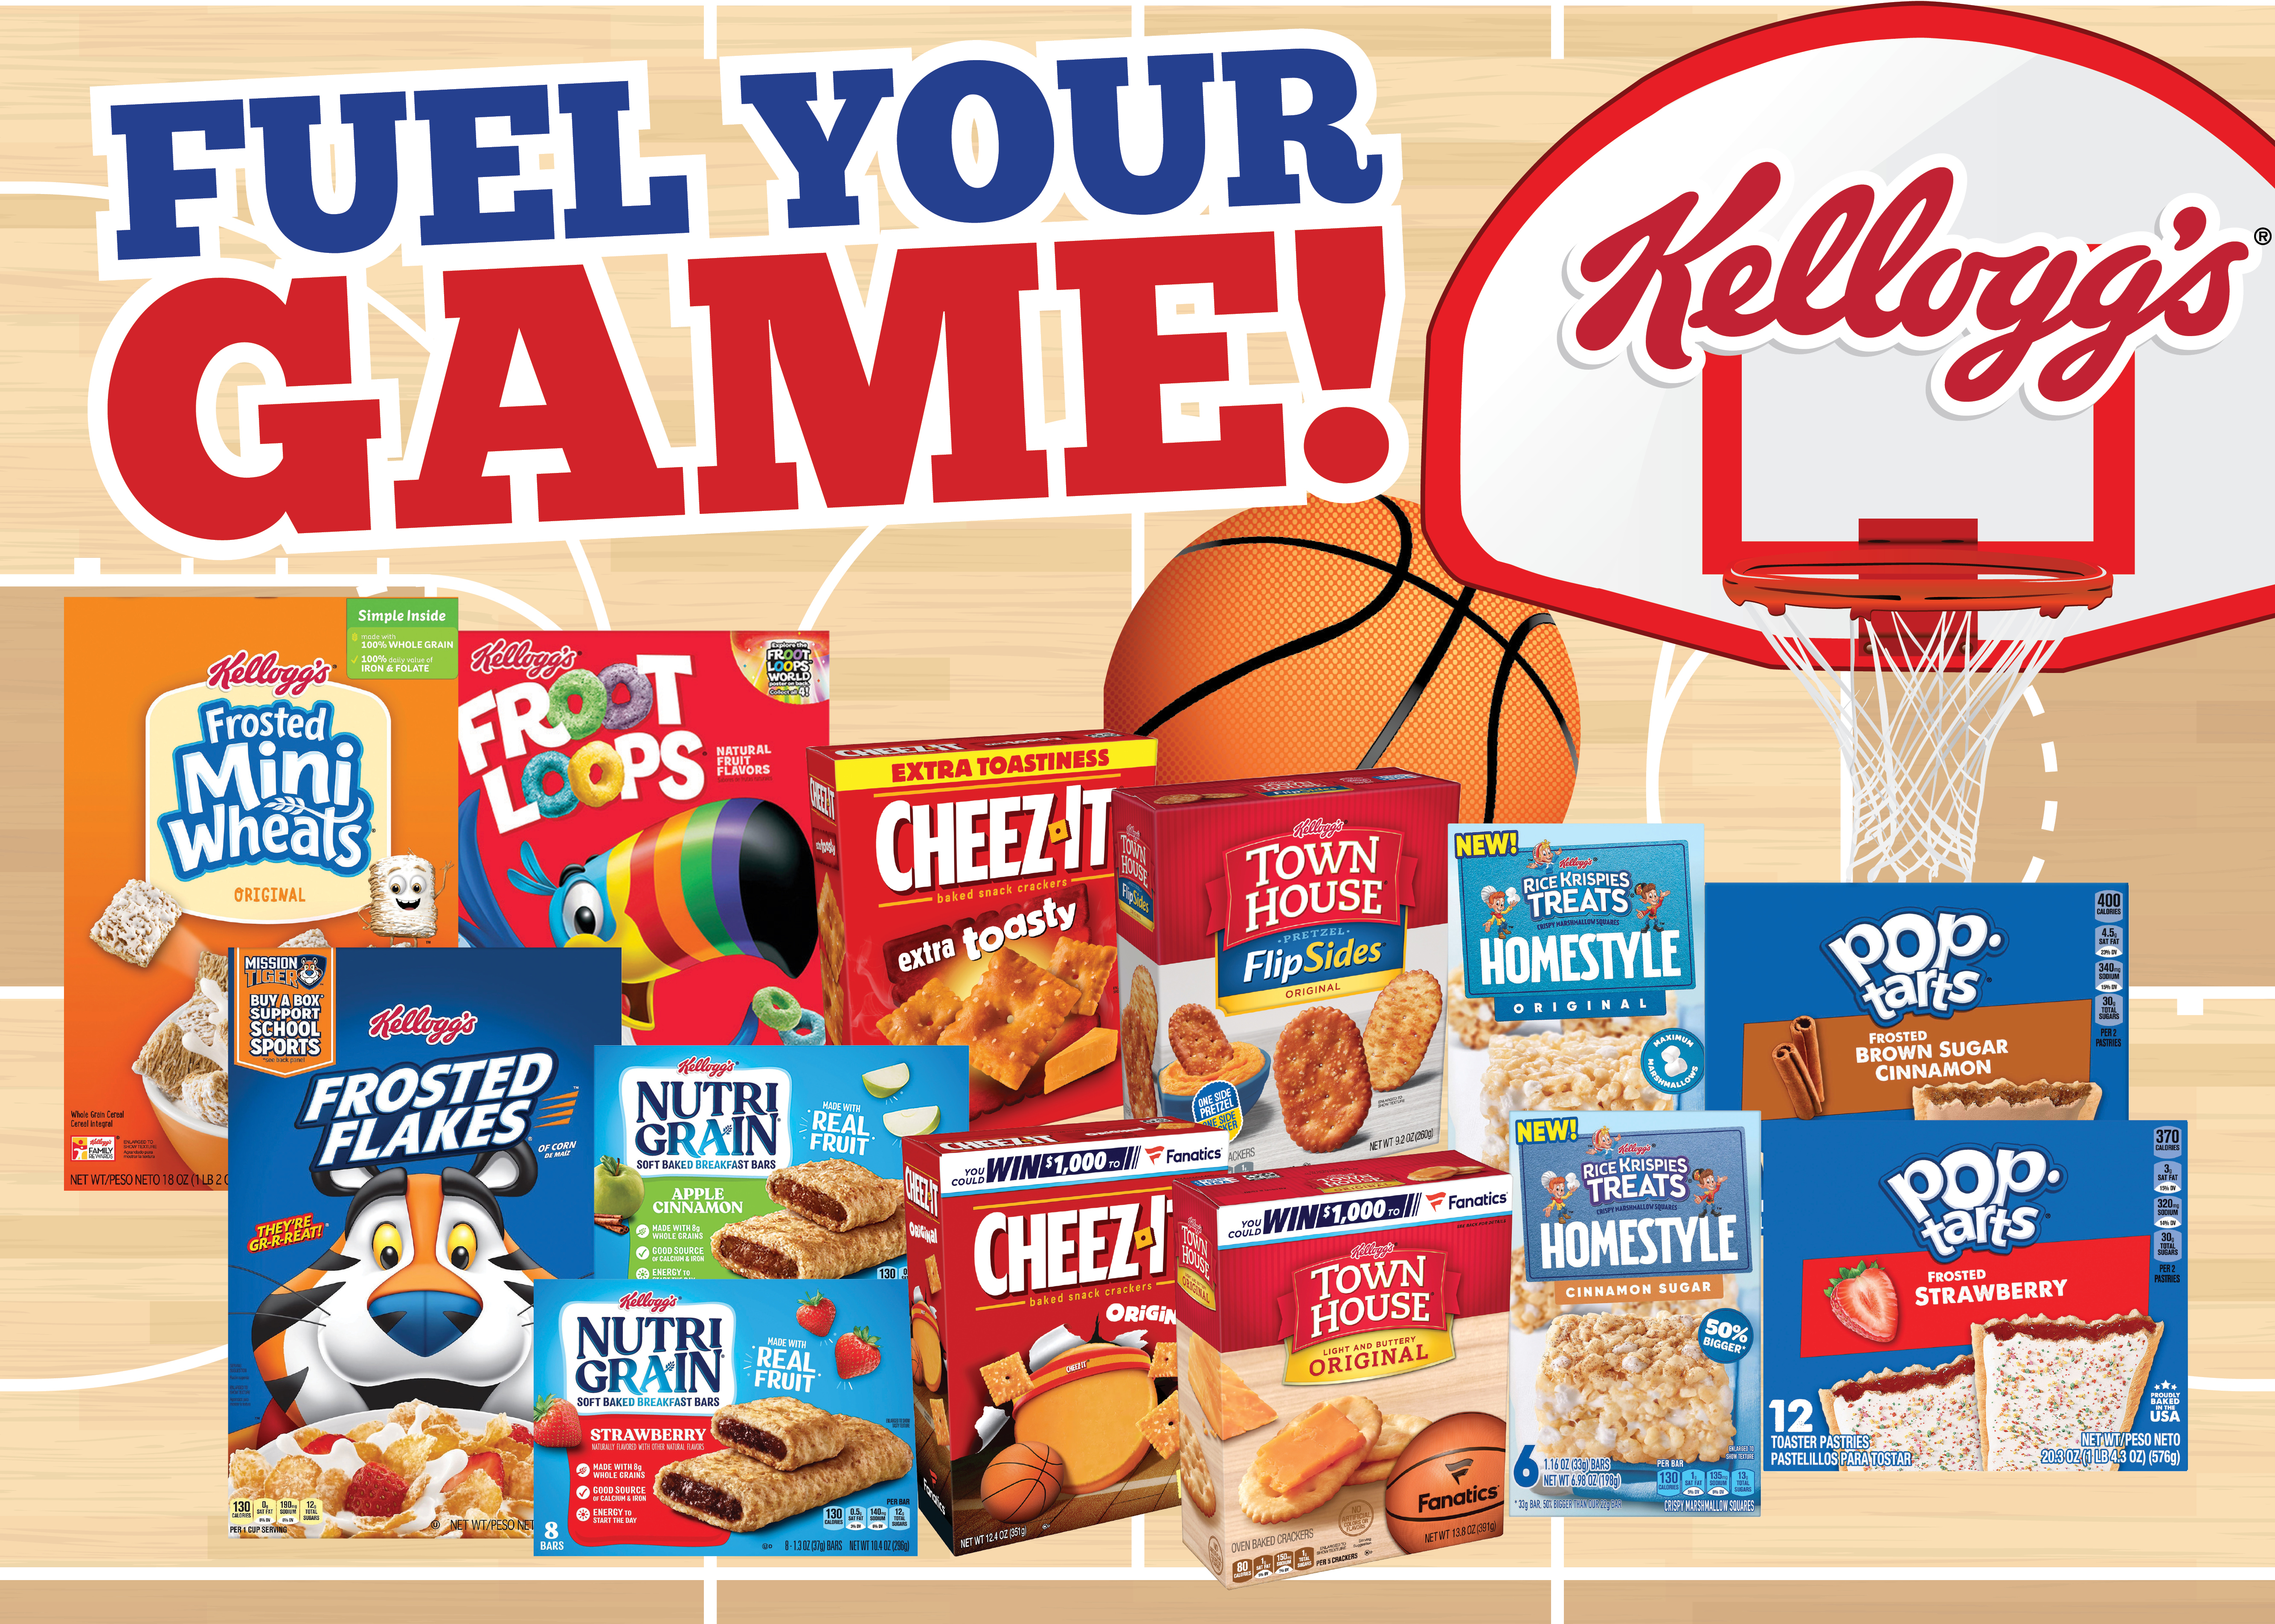 Fuel your Game!